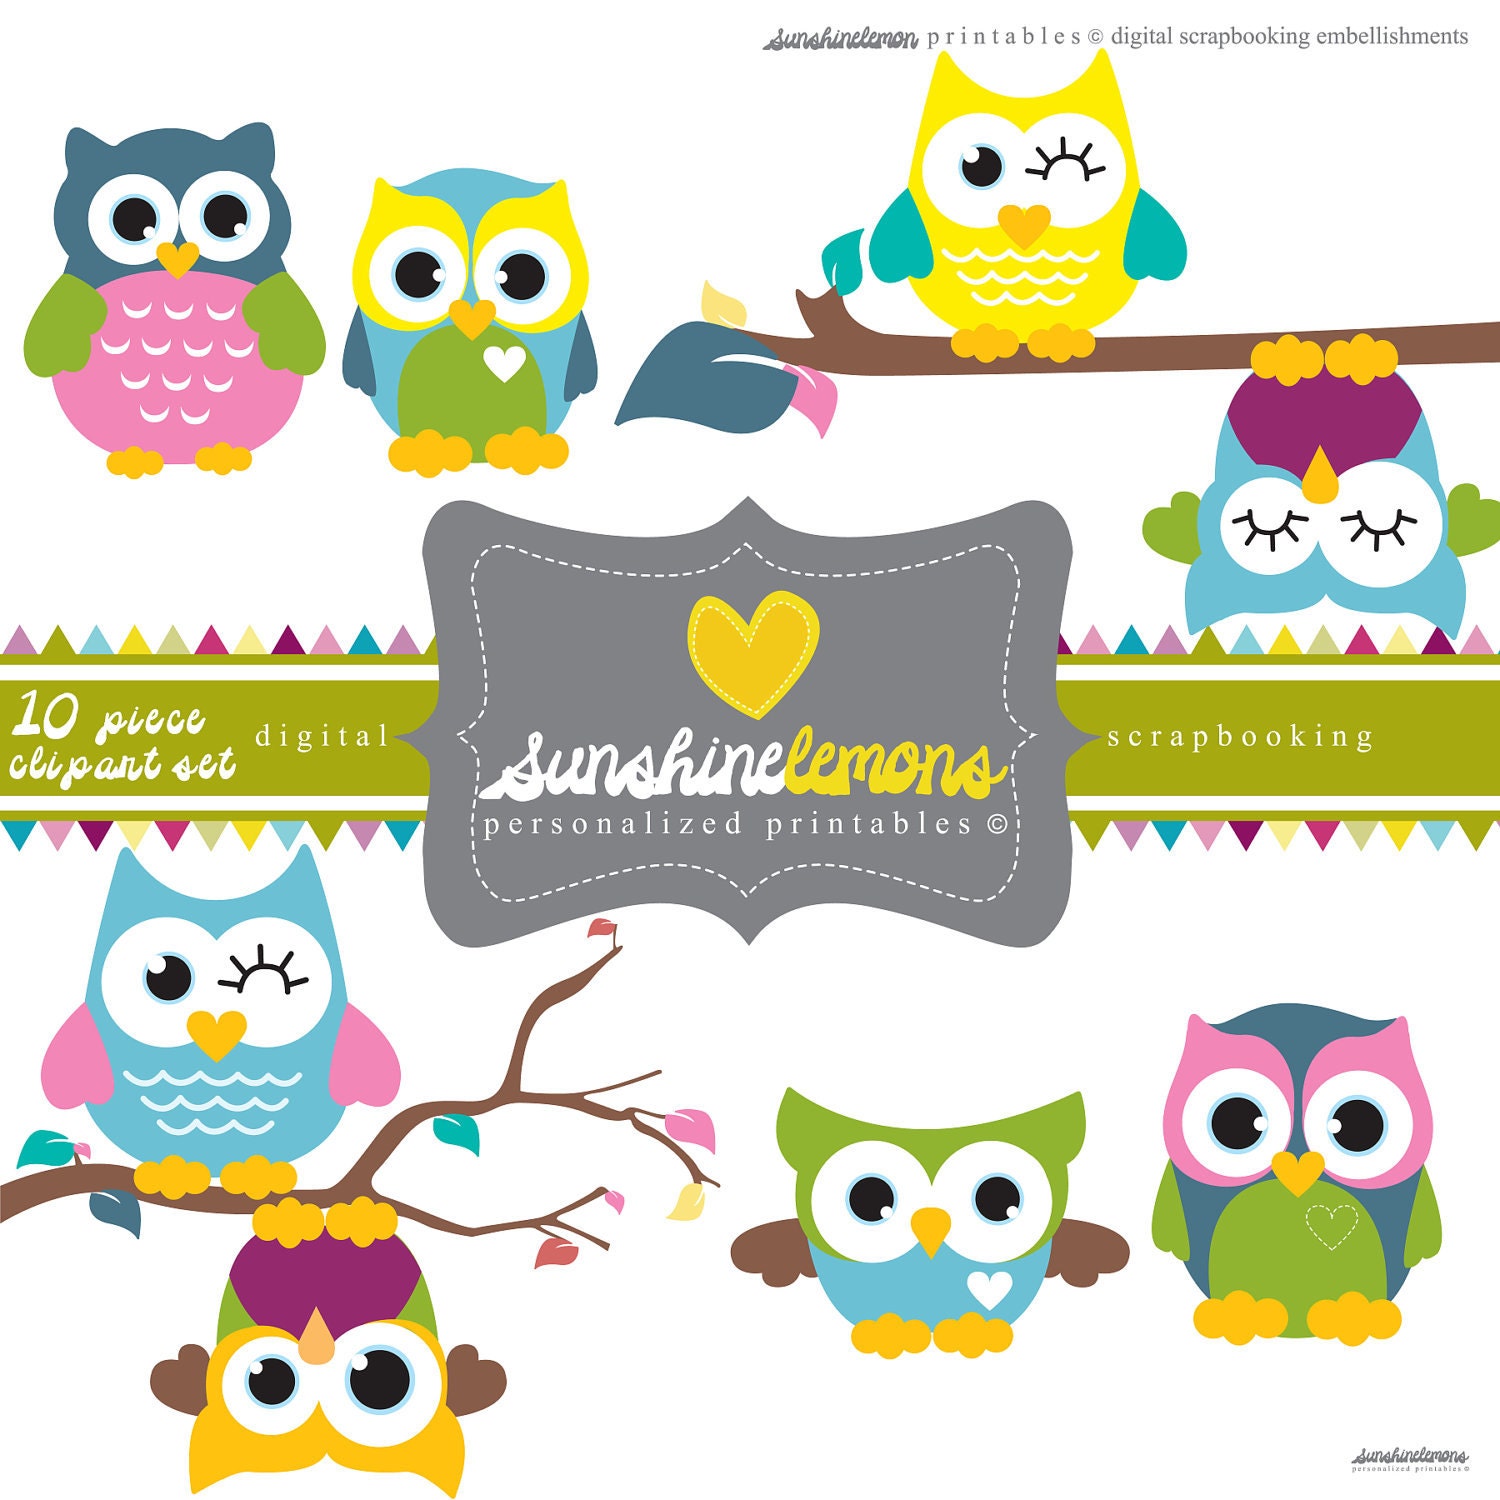 free vector clipart owl - photo #30